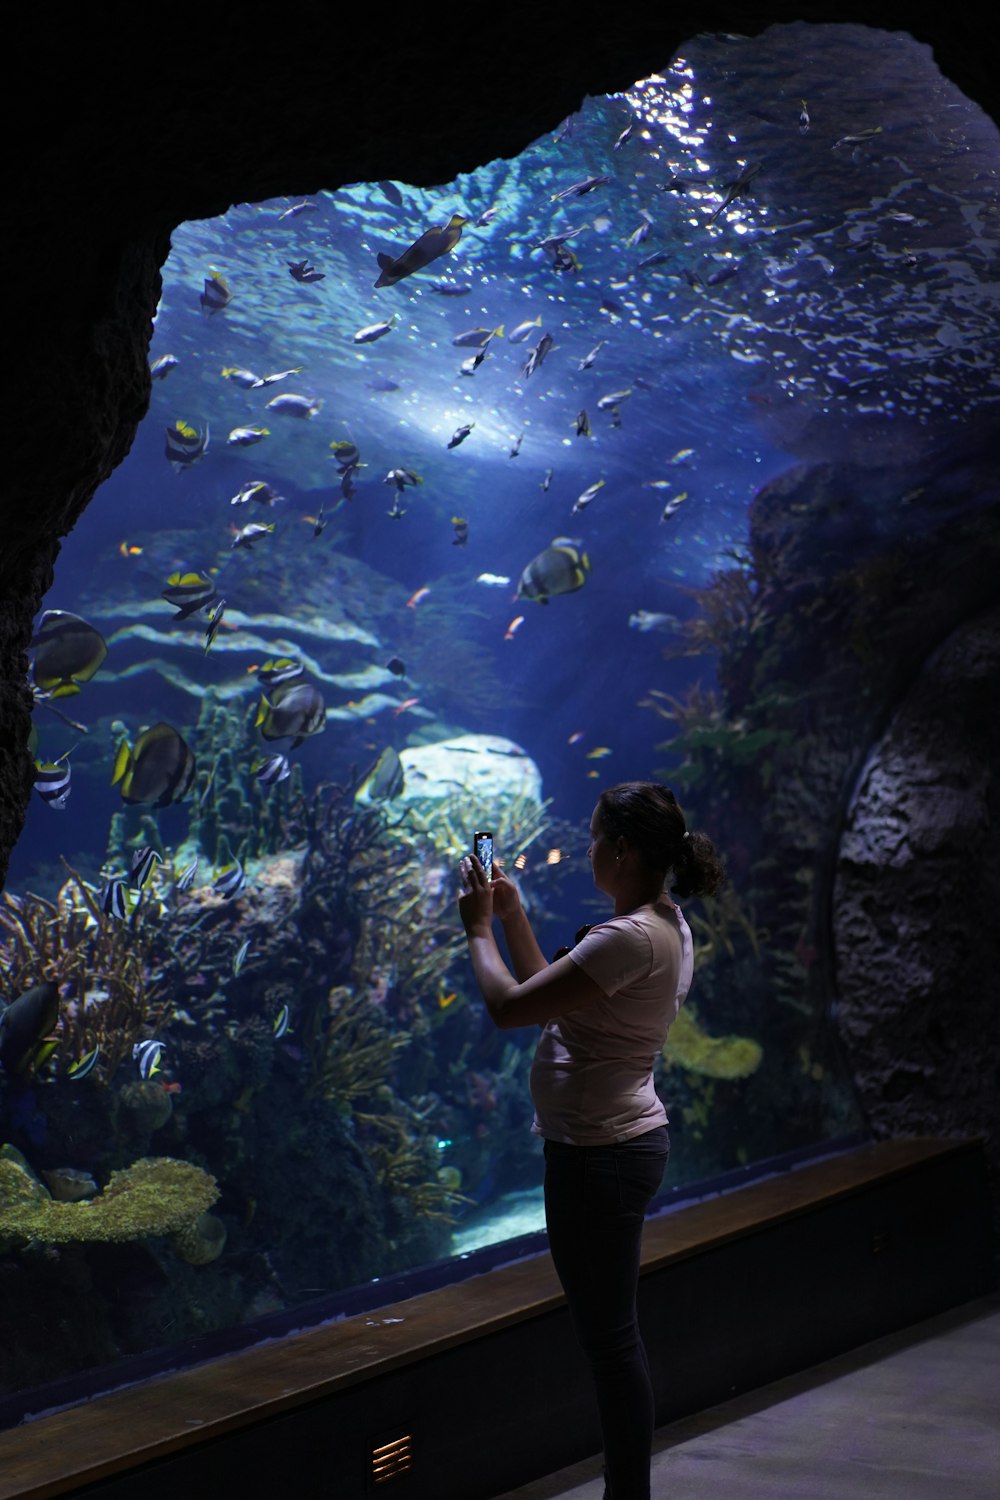 a person taking a picture of fish in a tank